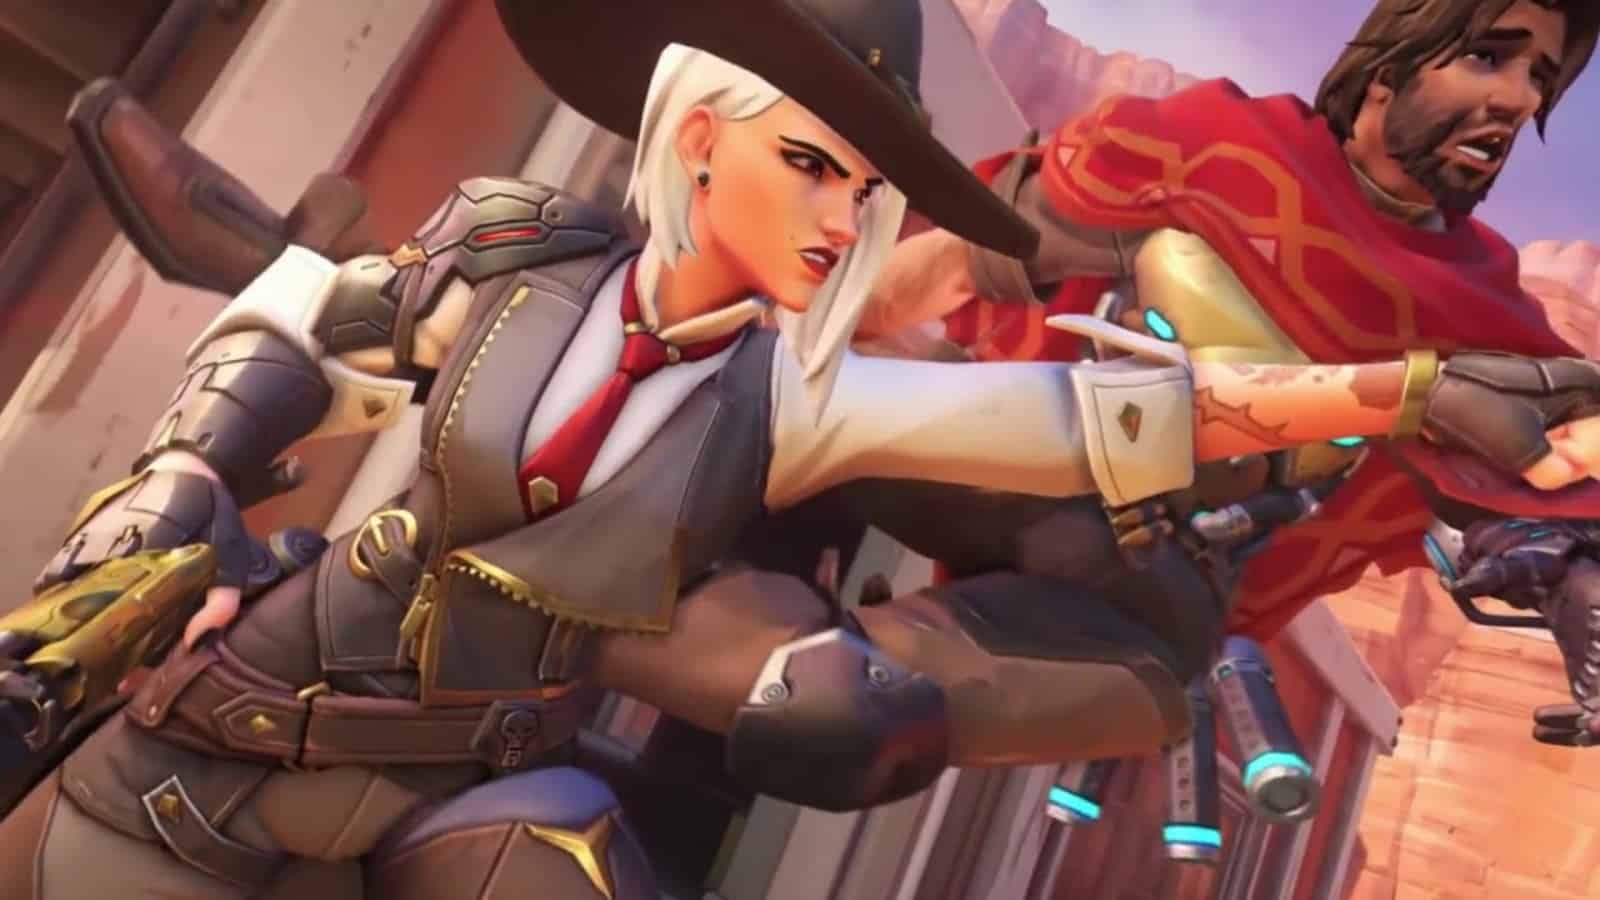 Ashe punches McCree in the face